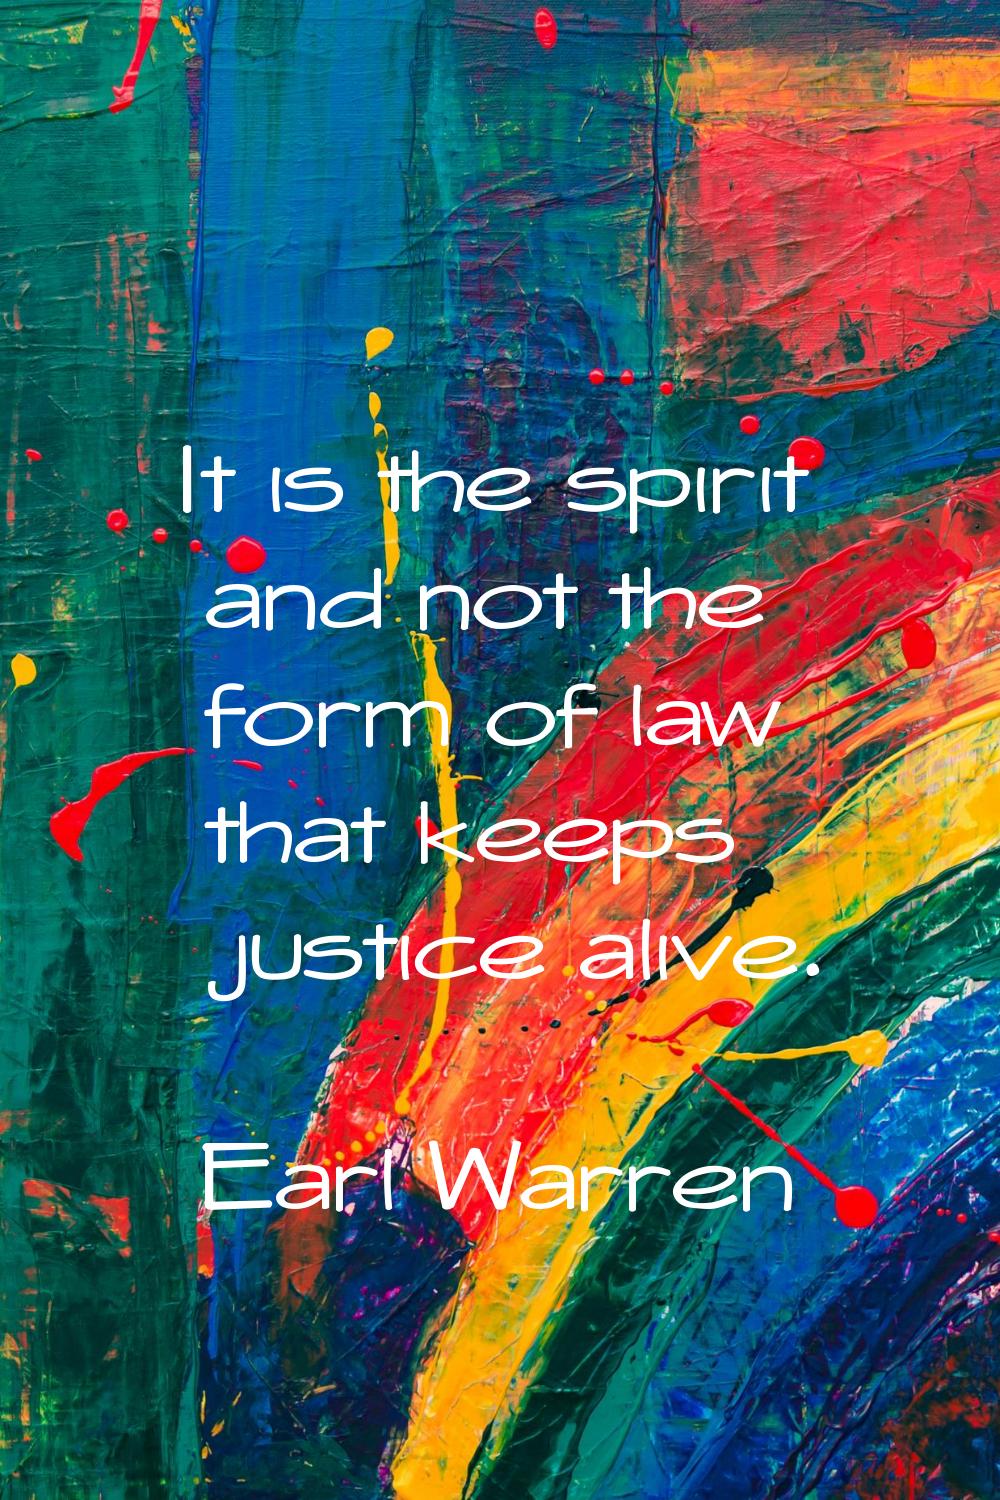 It is the spirit and not the form of law that keeps justice alive.